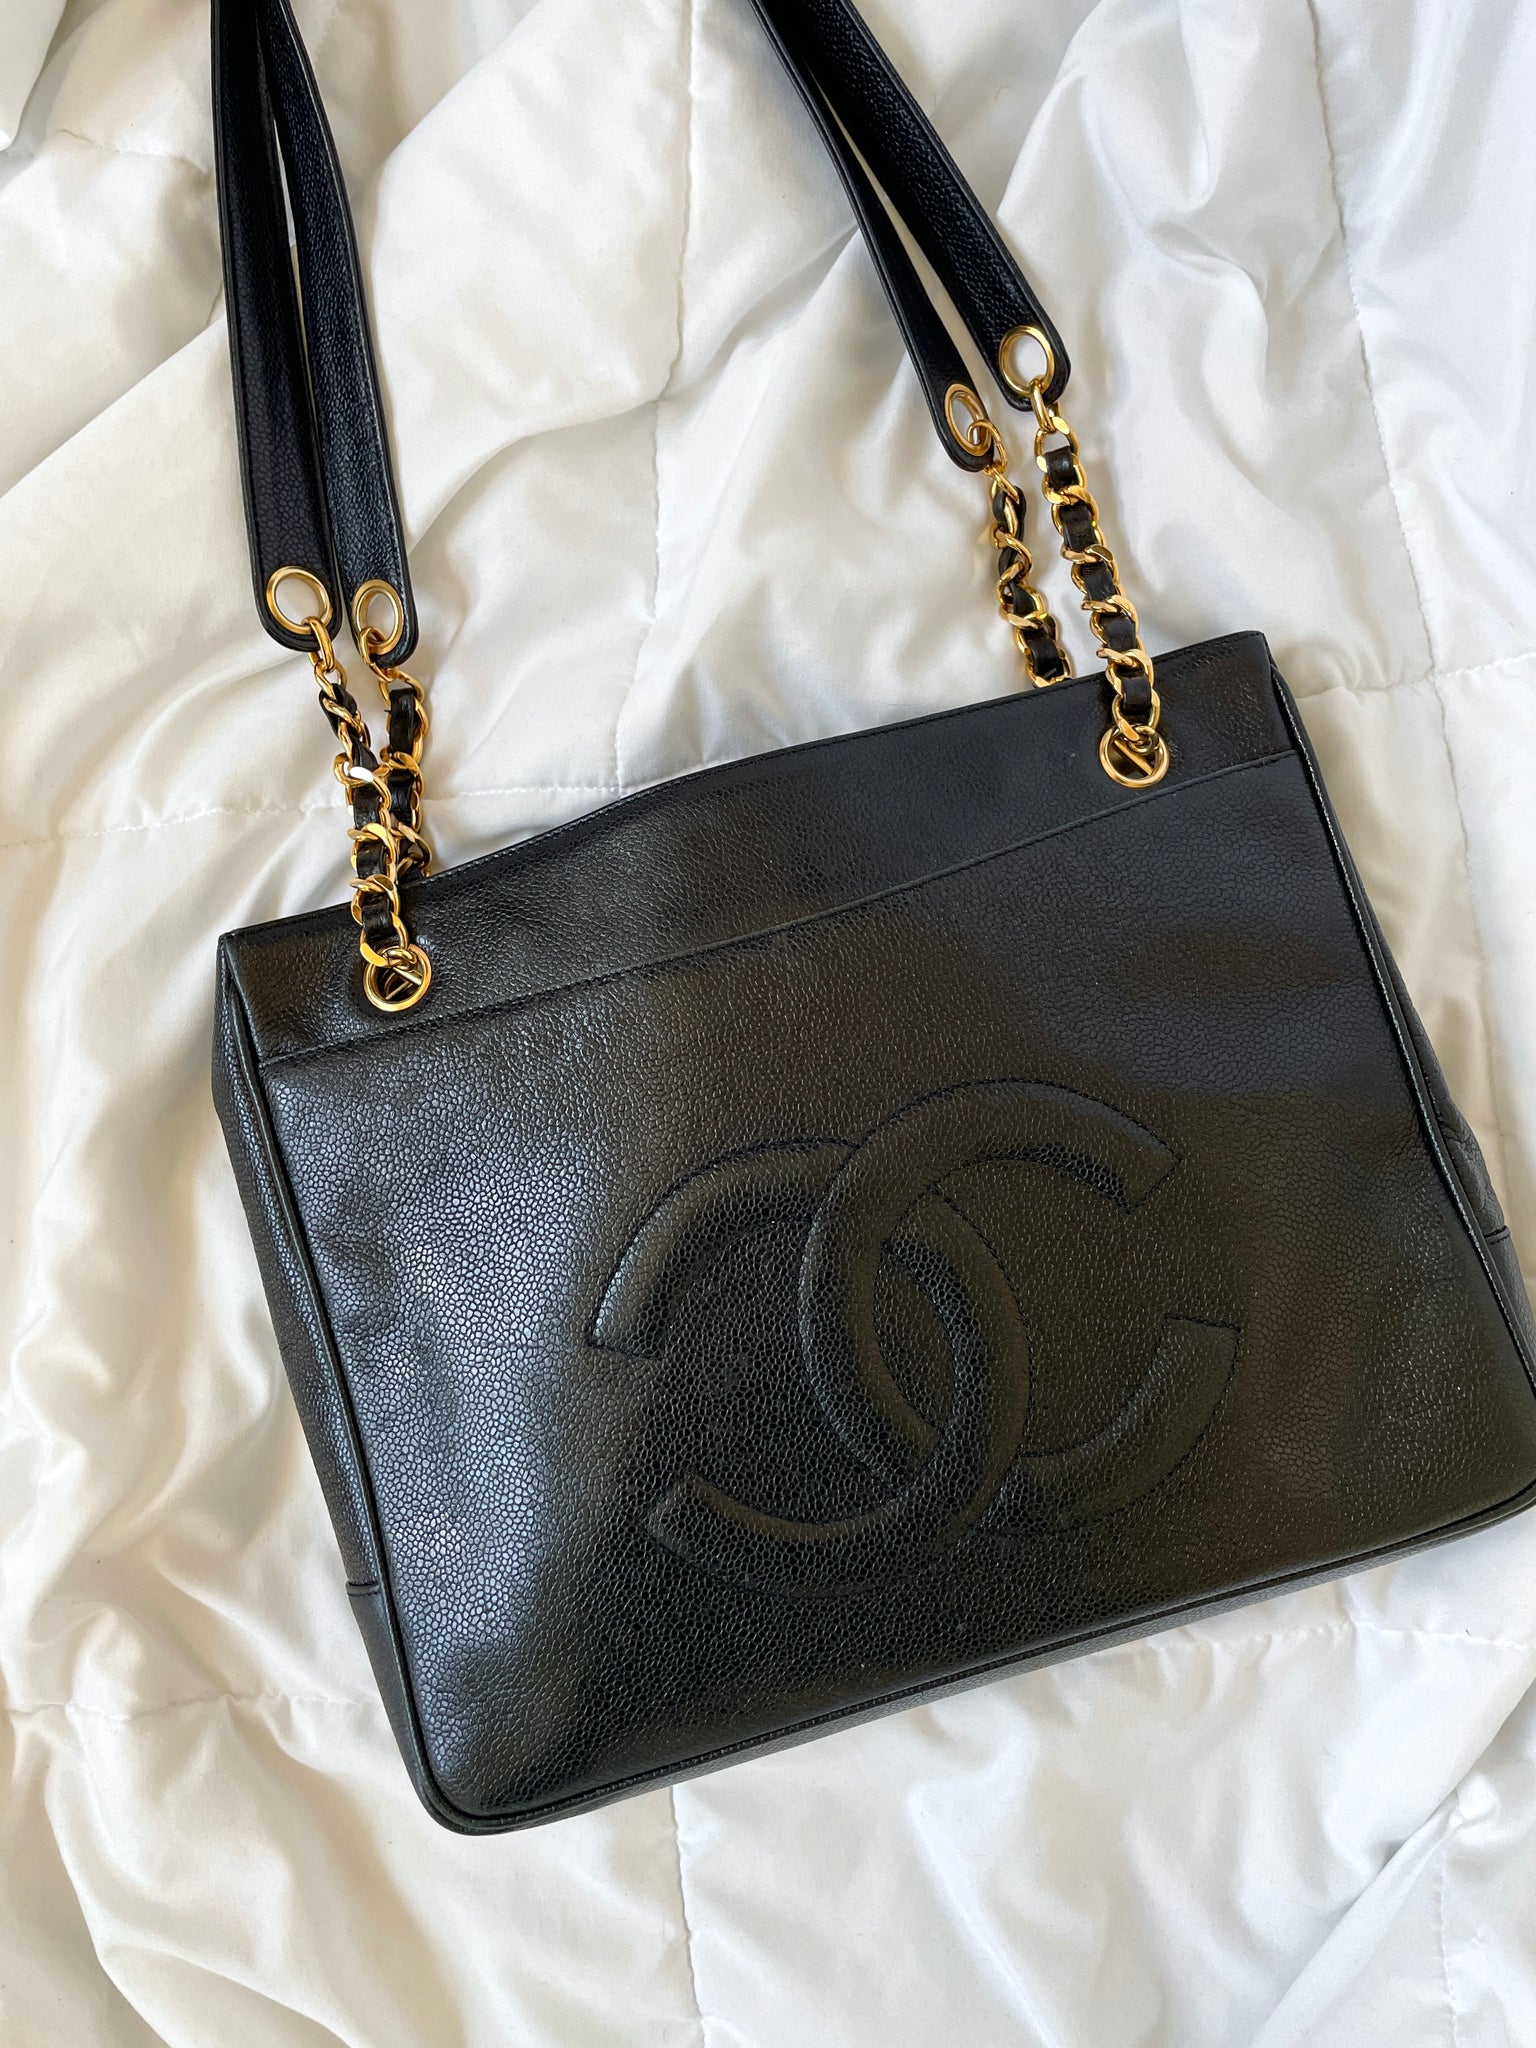 CHANEL Caviar Chain Shoulder Shopping Tote Bag Black Quilted Purse